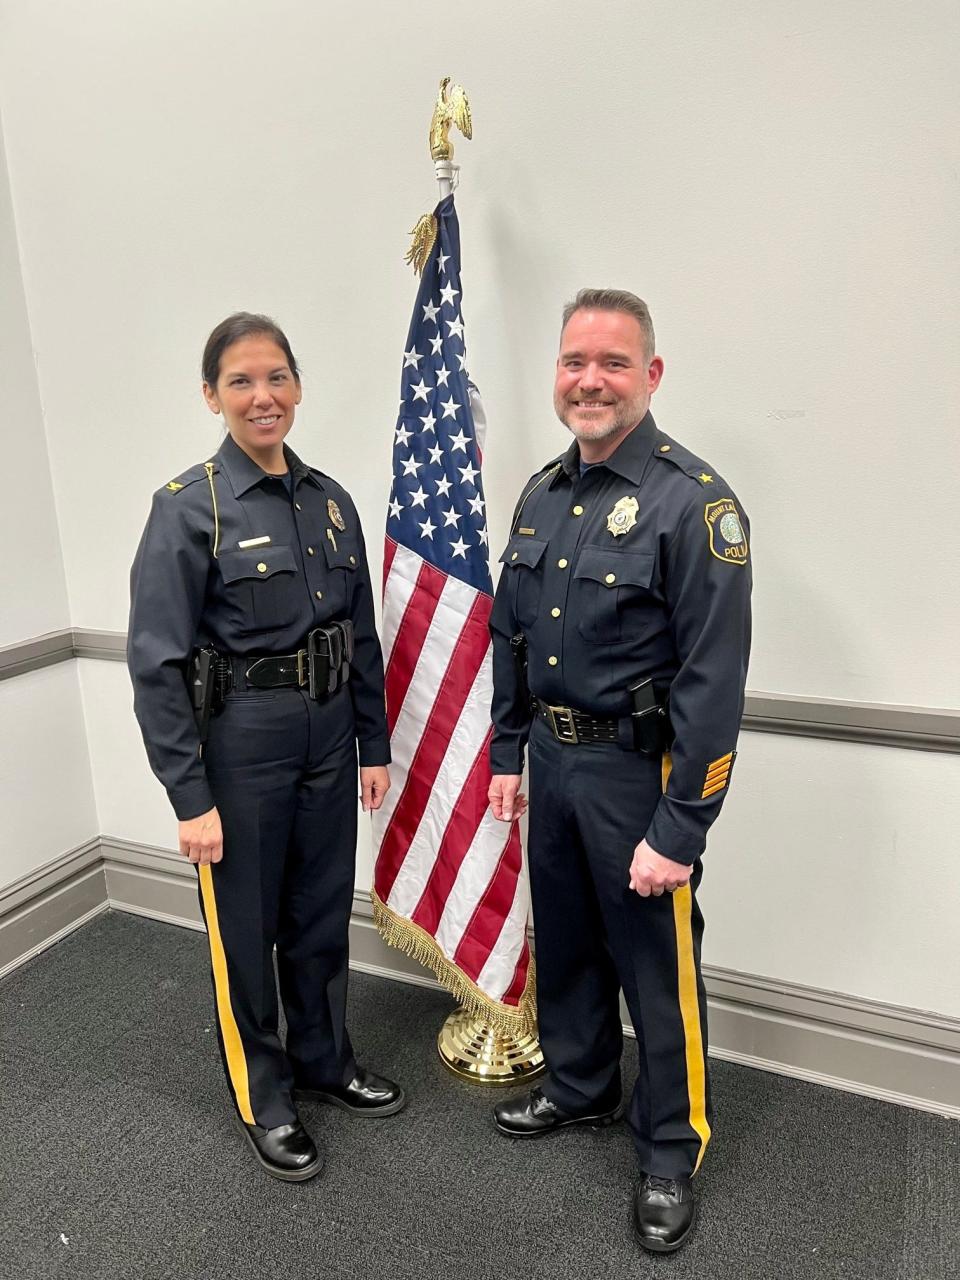 The new Mount Laurel police chief, Judy Lynn Schiavone, left, assumed command in January 2023 from now retired police chief Stephen. She was promoted by township council from deputy police chief.